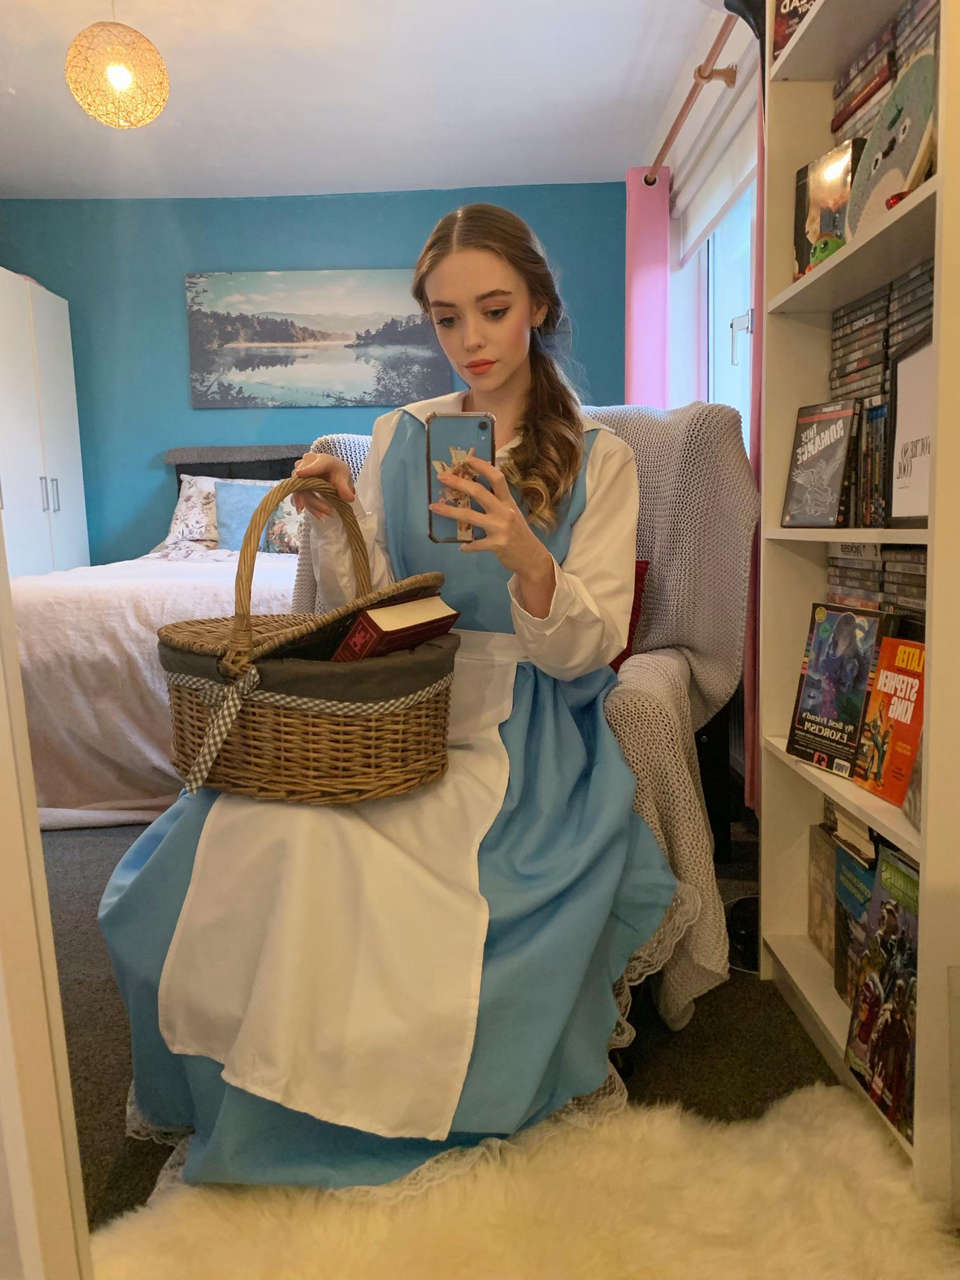 Looking For My Beast Belle From Beauty And The Beast By Highlandbunn